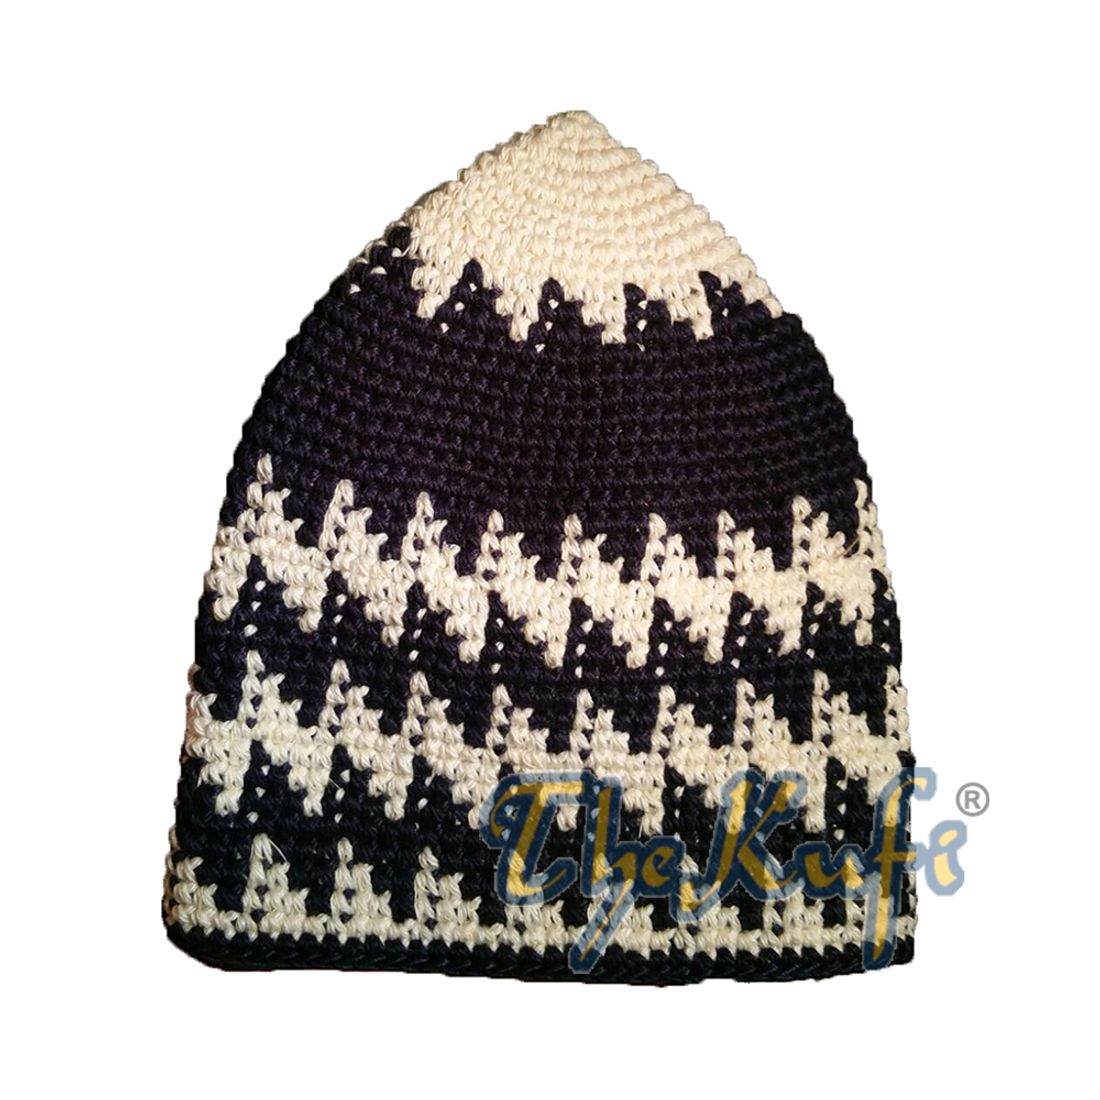 Hand-crocheted Cotton Sturdy Faded Cream & Dark Blue Hounds-tooth Zigzag Kufi Hat